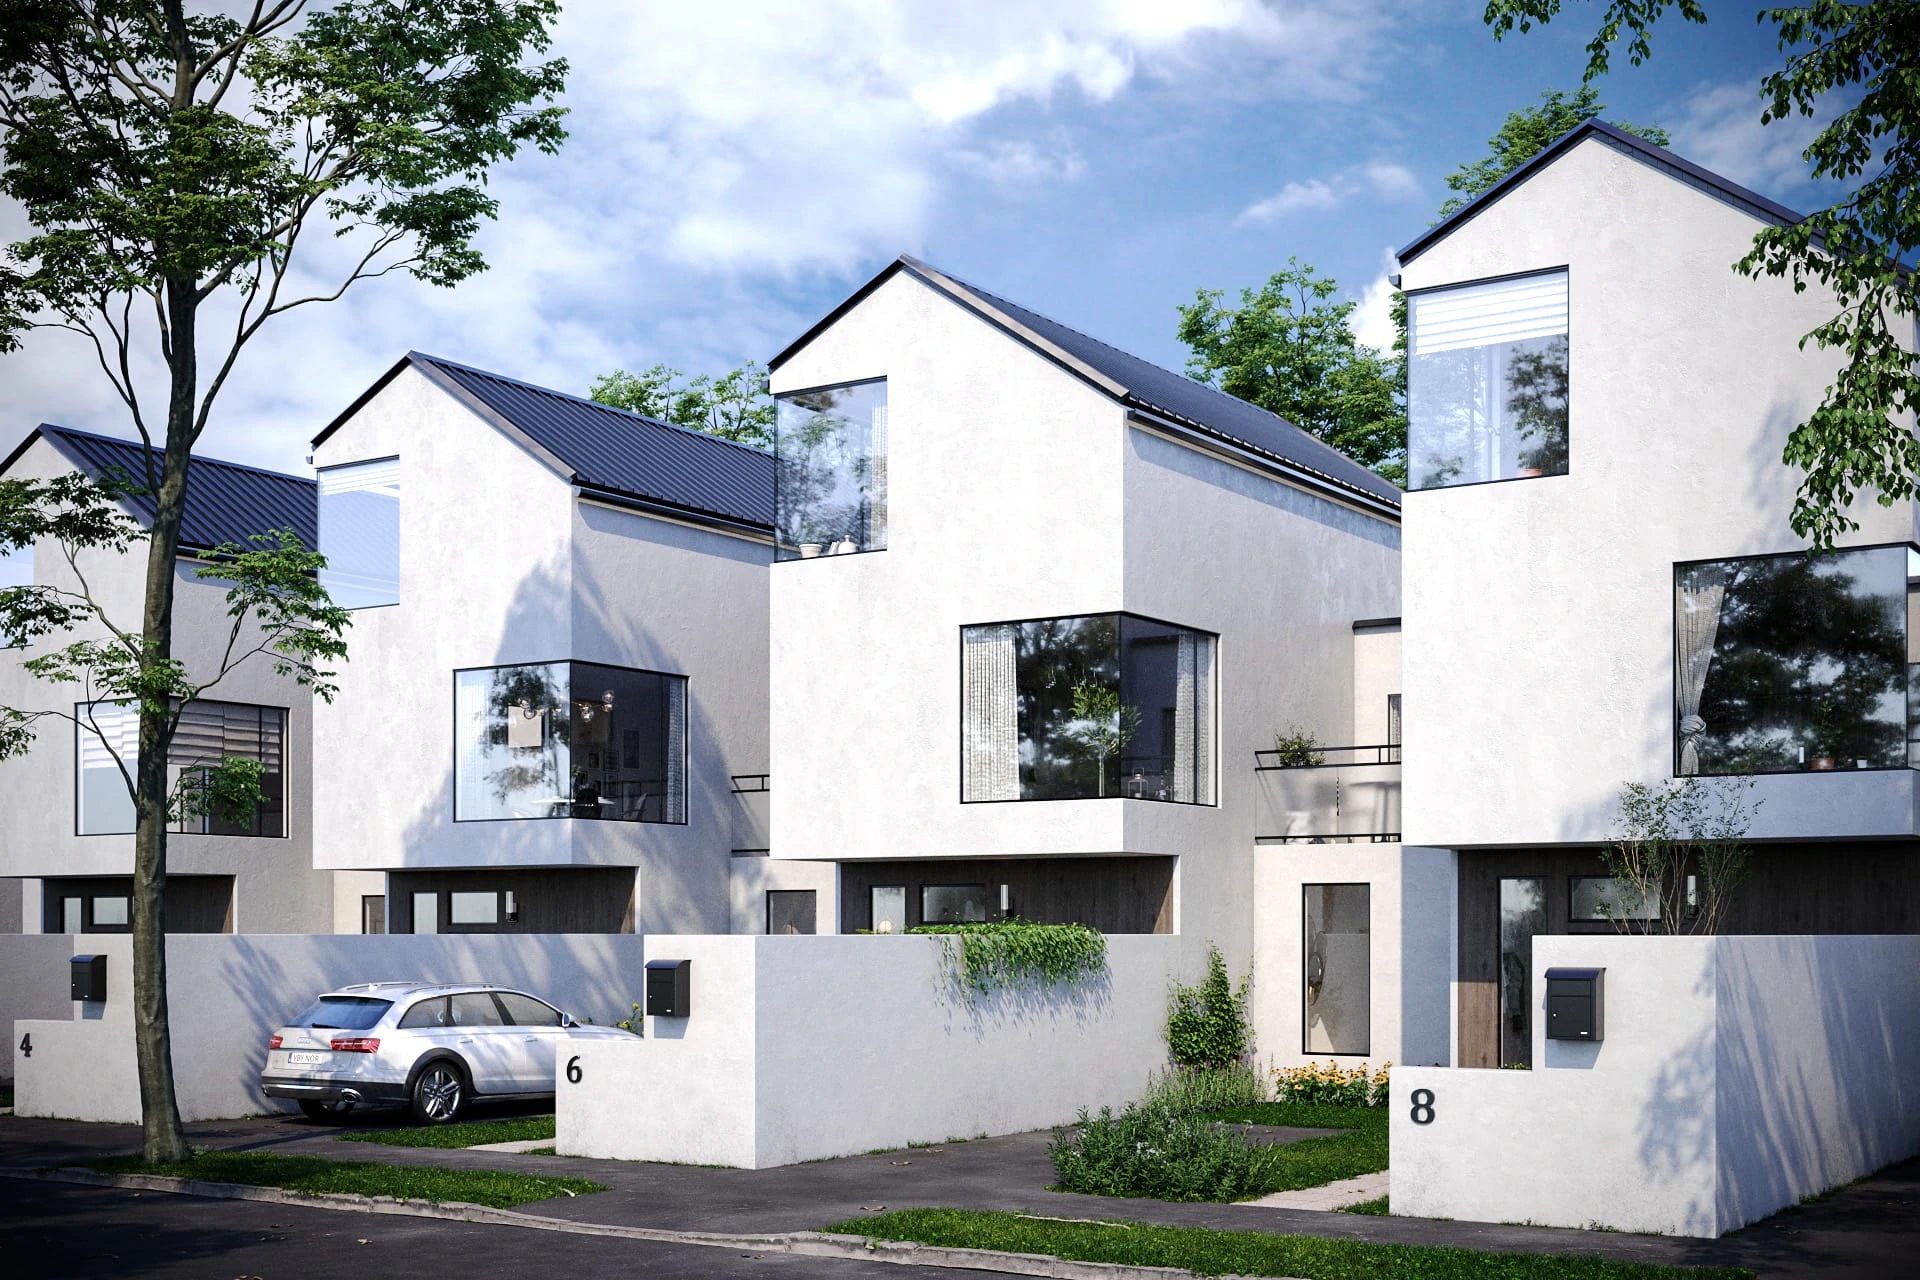 Architectural rendering of a modern townhouse